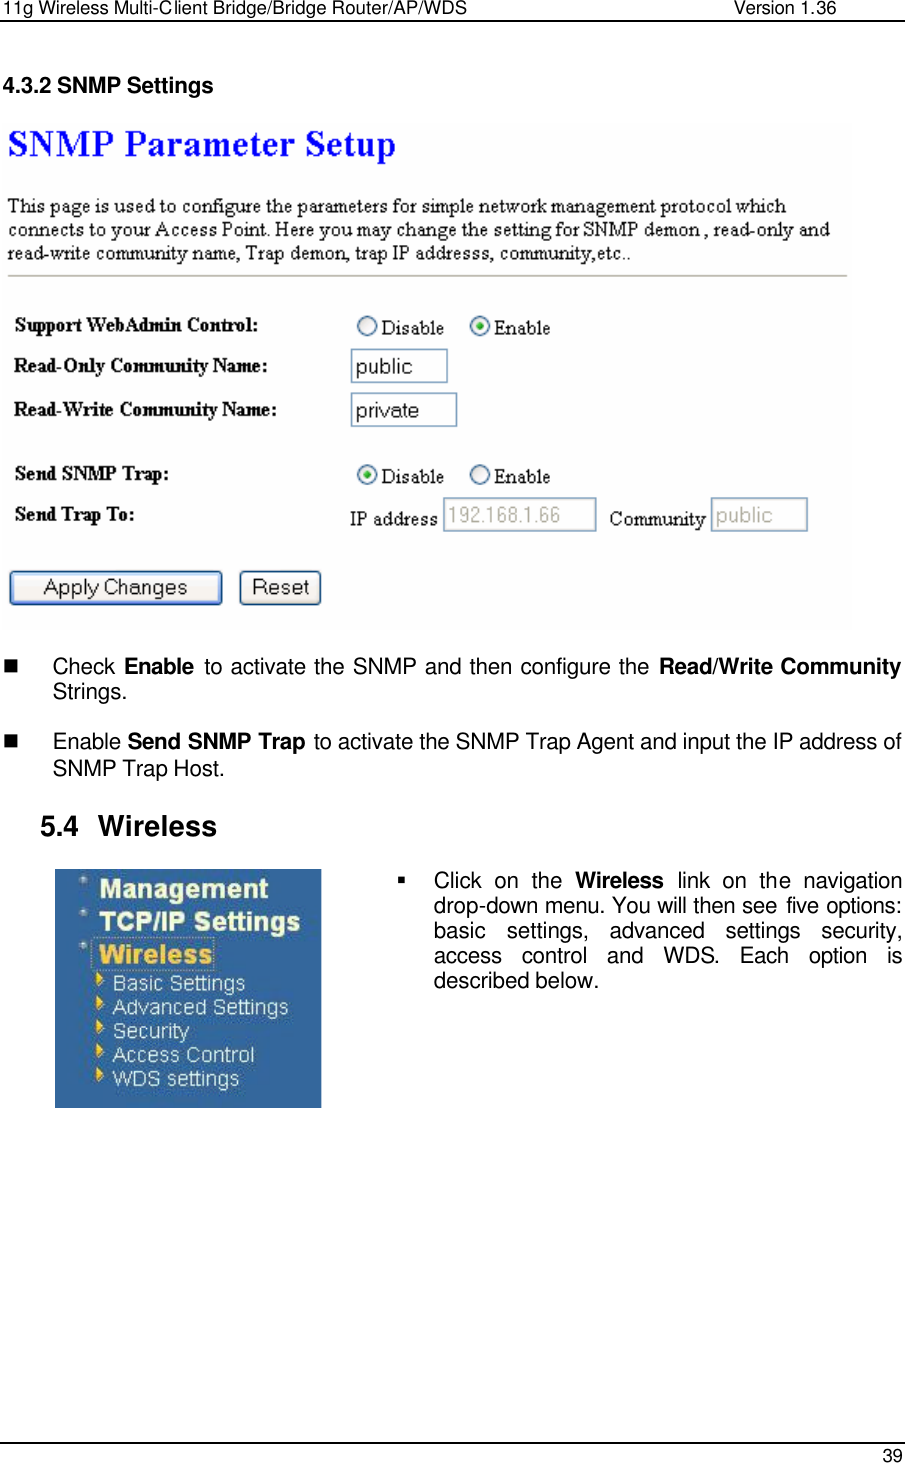 11g Wireless Multi-Client Bridge/Bridge Router/AP/WDS                                                   Version 1.36    39   4.3.2 SNMP Settings    n Check  Enable to activate the SNMP and then configure the Read/Write Community Strings.  n Enable Send SNMP Trap to activate the SNMP Trap Agent and input the IP address of SNMP Trap Host.  5.4 Wireless § Click on the Wireless link on the navigation drop-down menu. You will then see five options: basic settings, advanced settings security, access control and WDS. Each option is described below.                